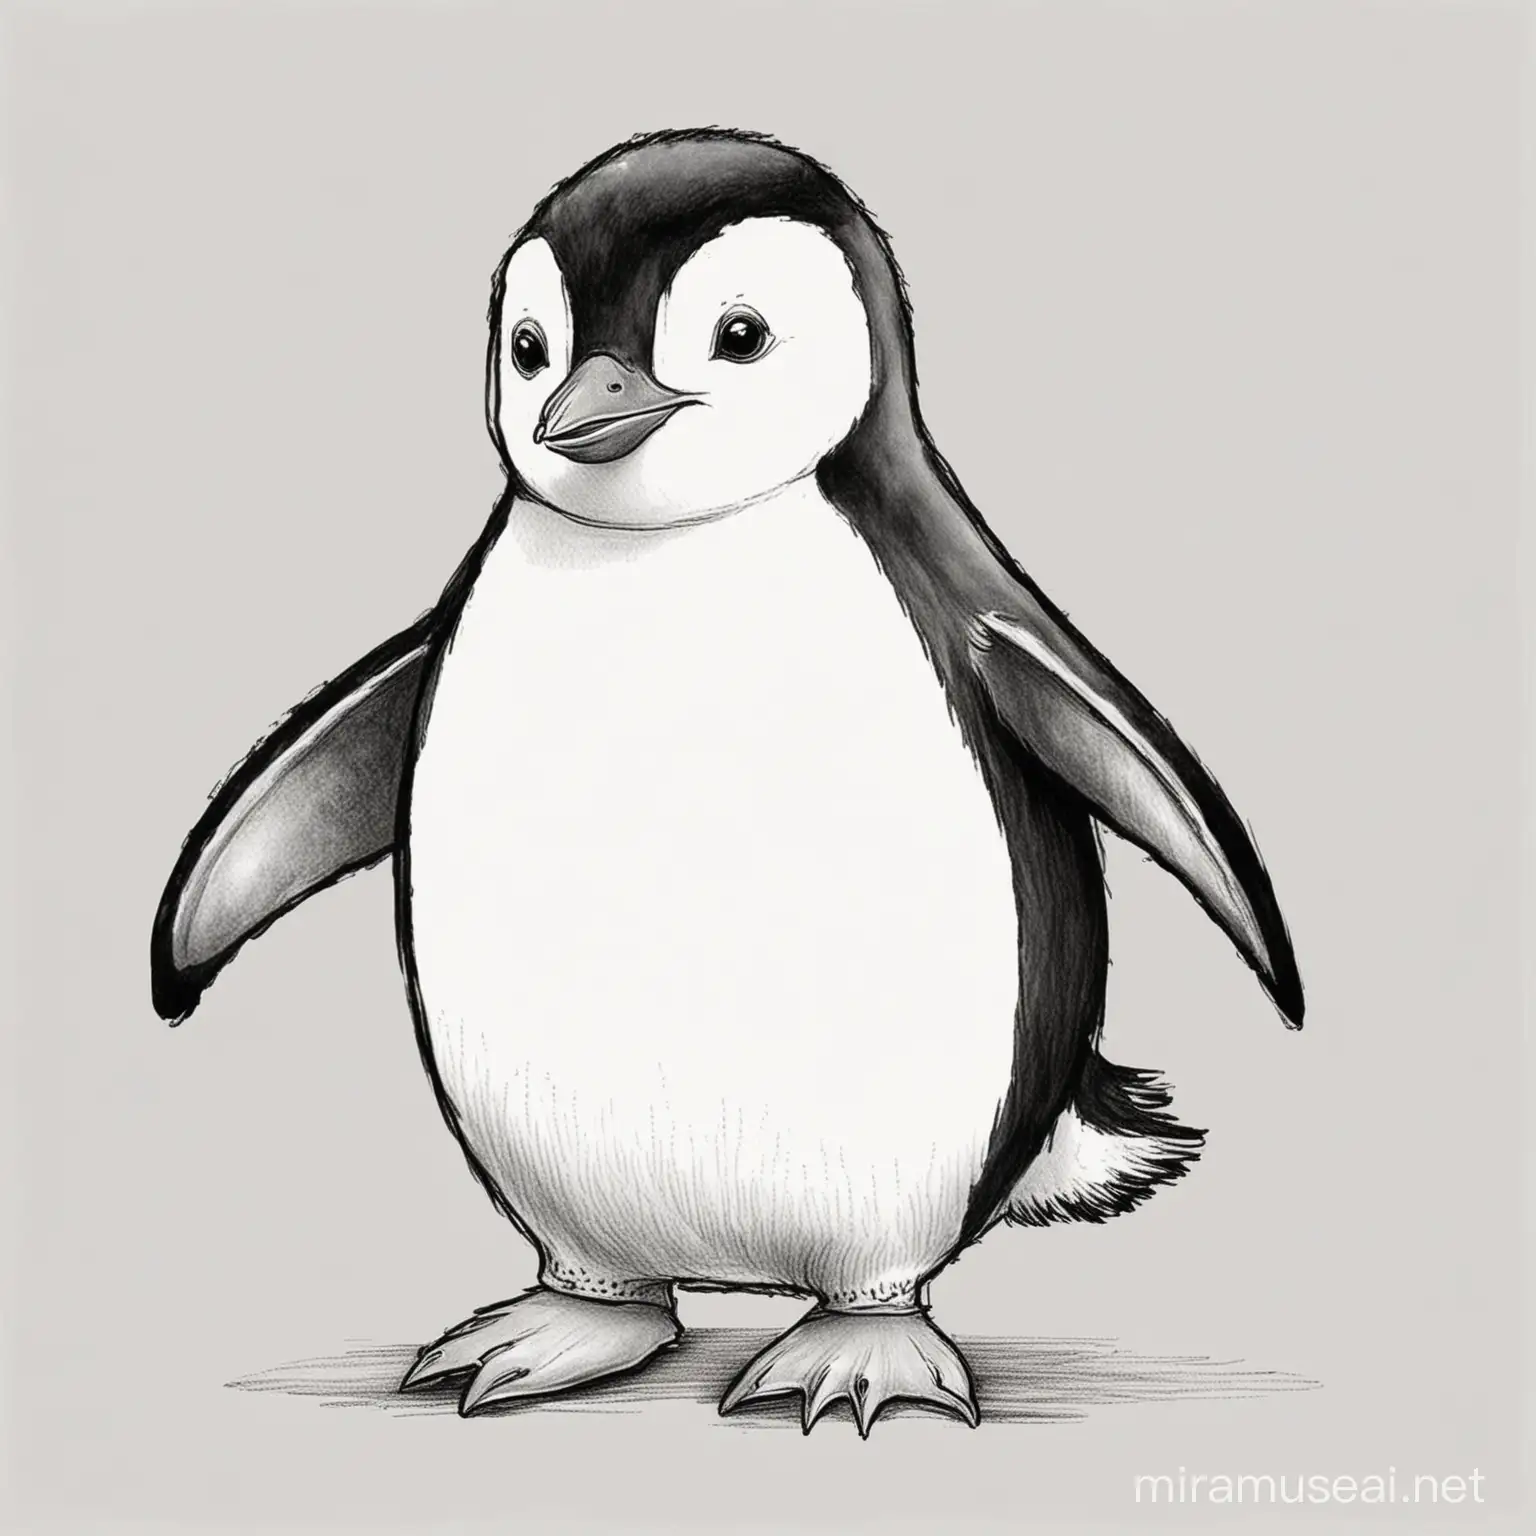 Create a simple, easy-to-color, cartoon illustration of a playful penguin that is suitable for a 3-year-old child to engage with. The penguin should evoke the charm and simplicity found in classic children's book illustrations. For this image, no specific colors should be applied as it is intended for coloring activities with children.
